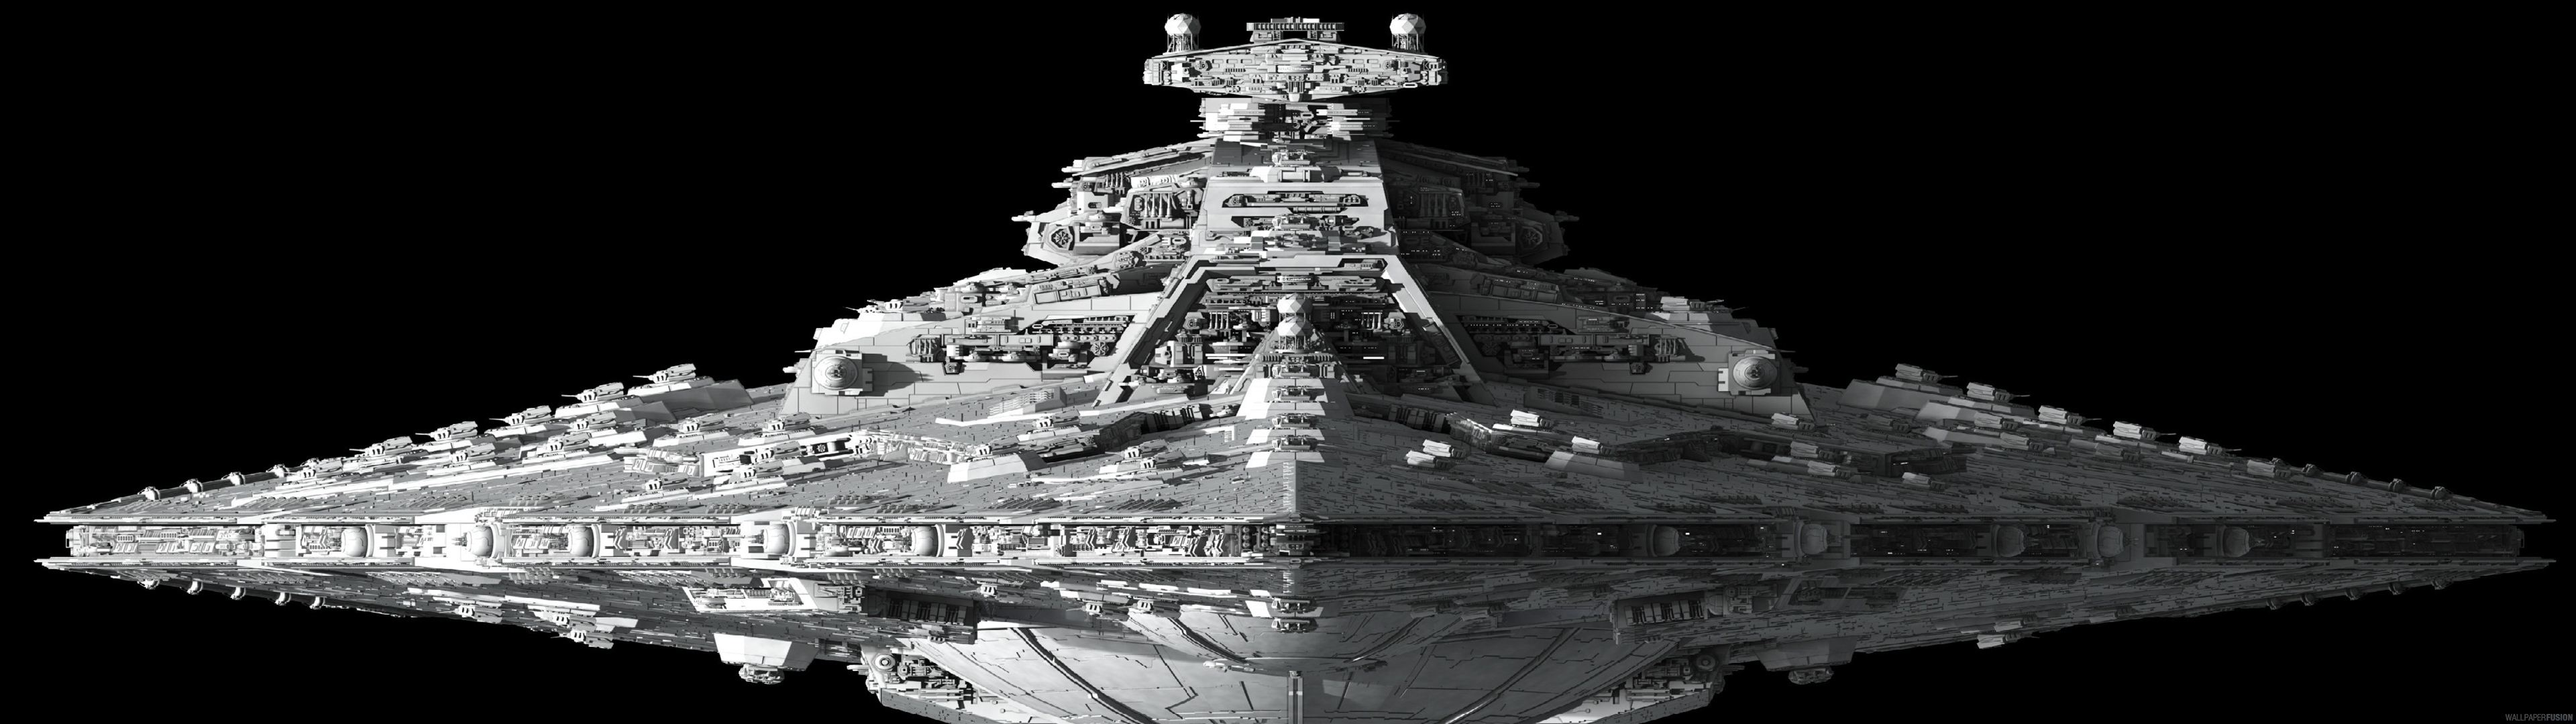 dual monitor star destroyer wallpaper   Comment 136 added by 3840x1080